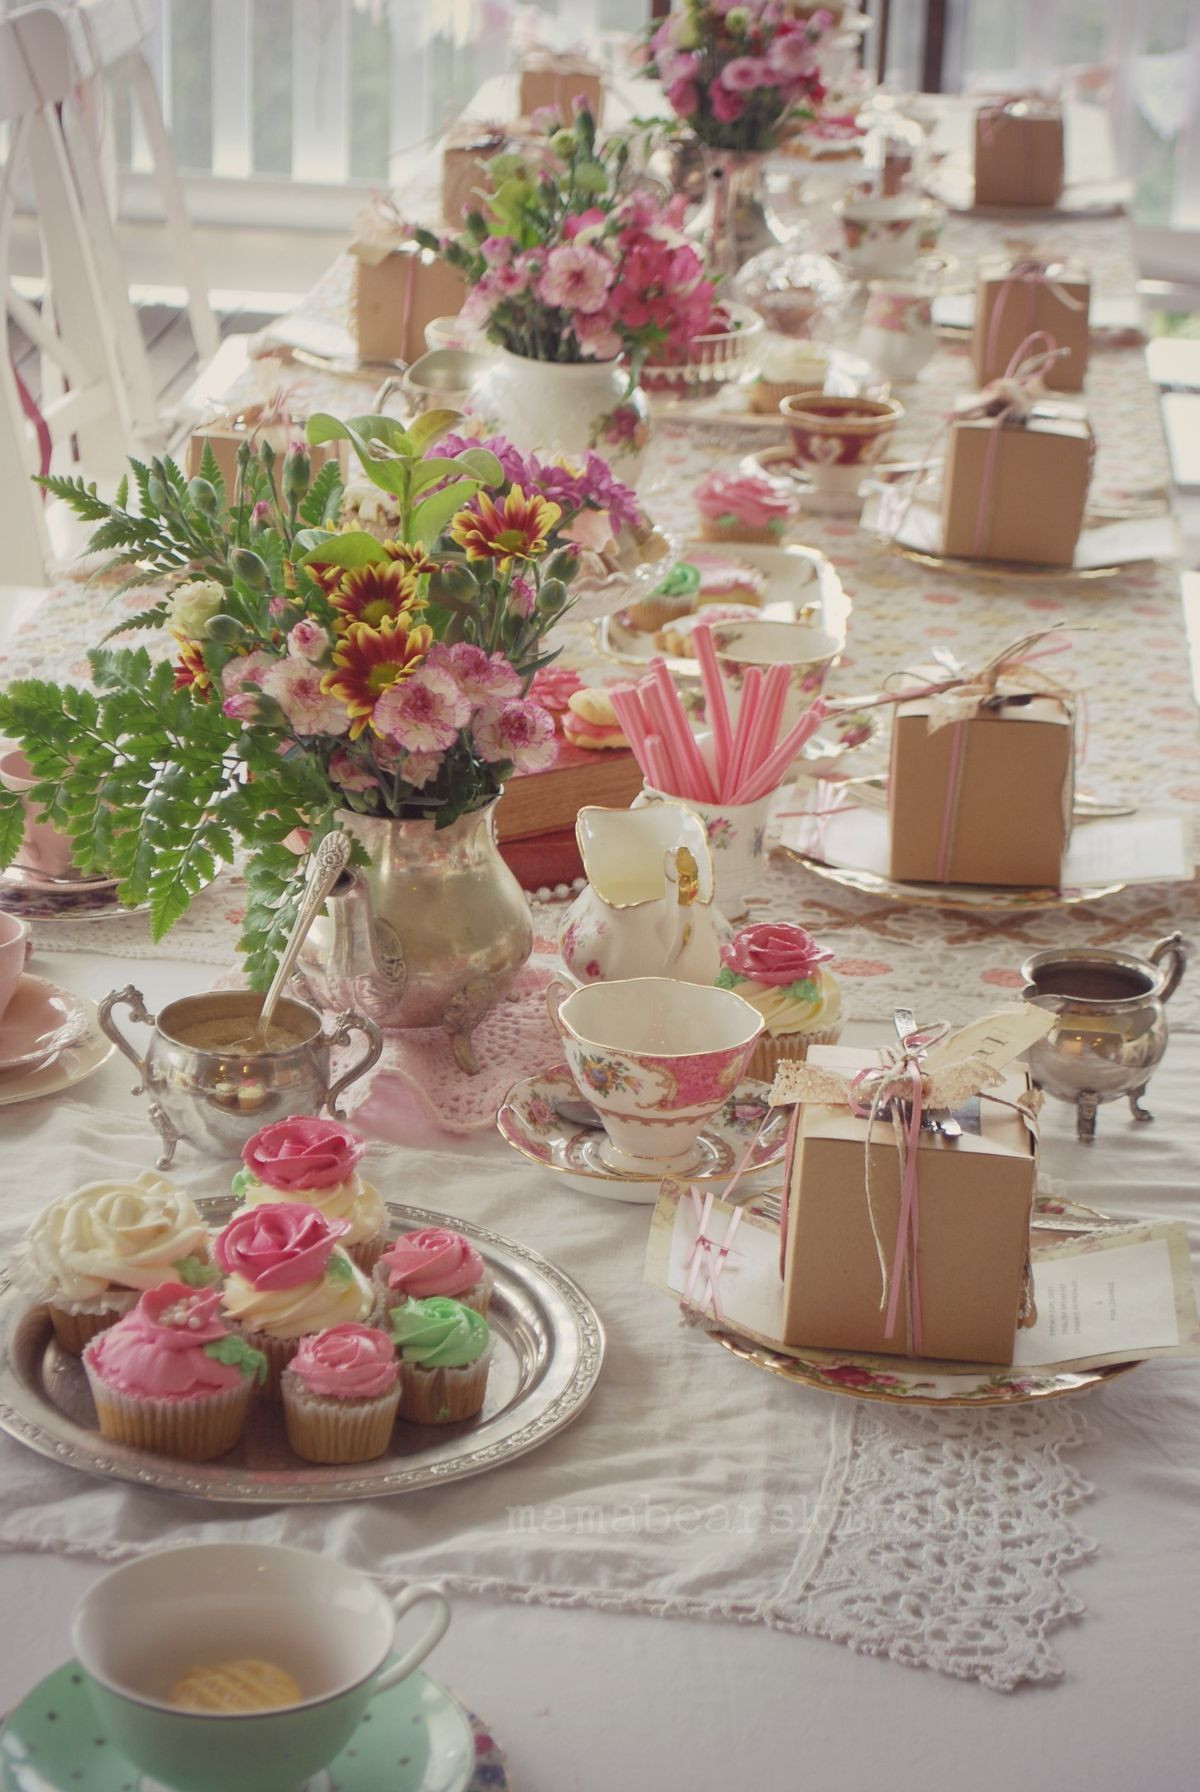 Tea Party Setup Ideas
 Pin by Joy Ray on Tablescape in 2019